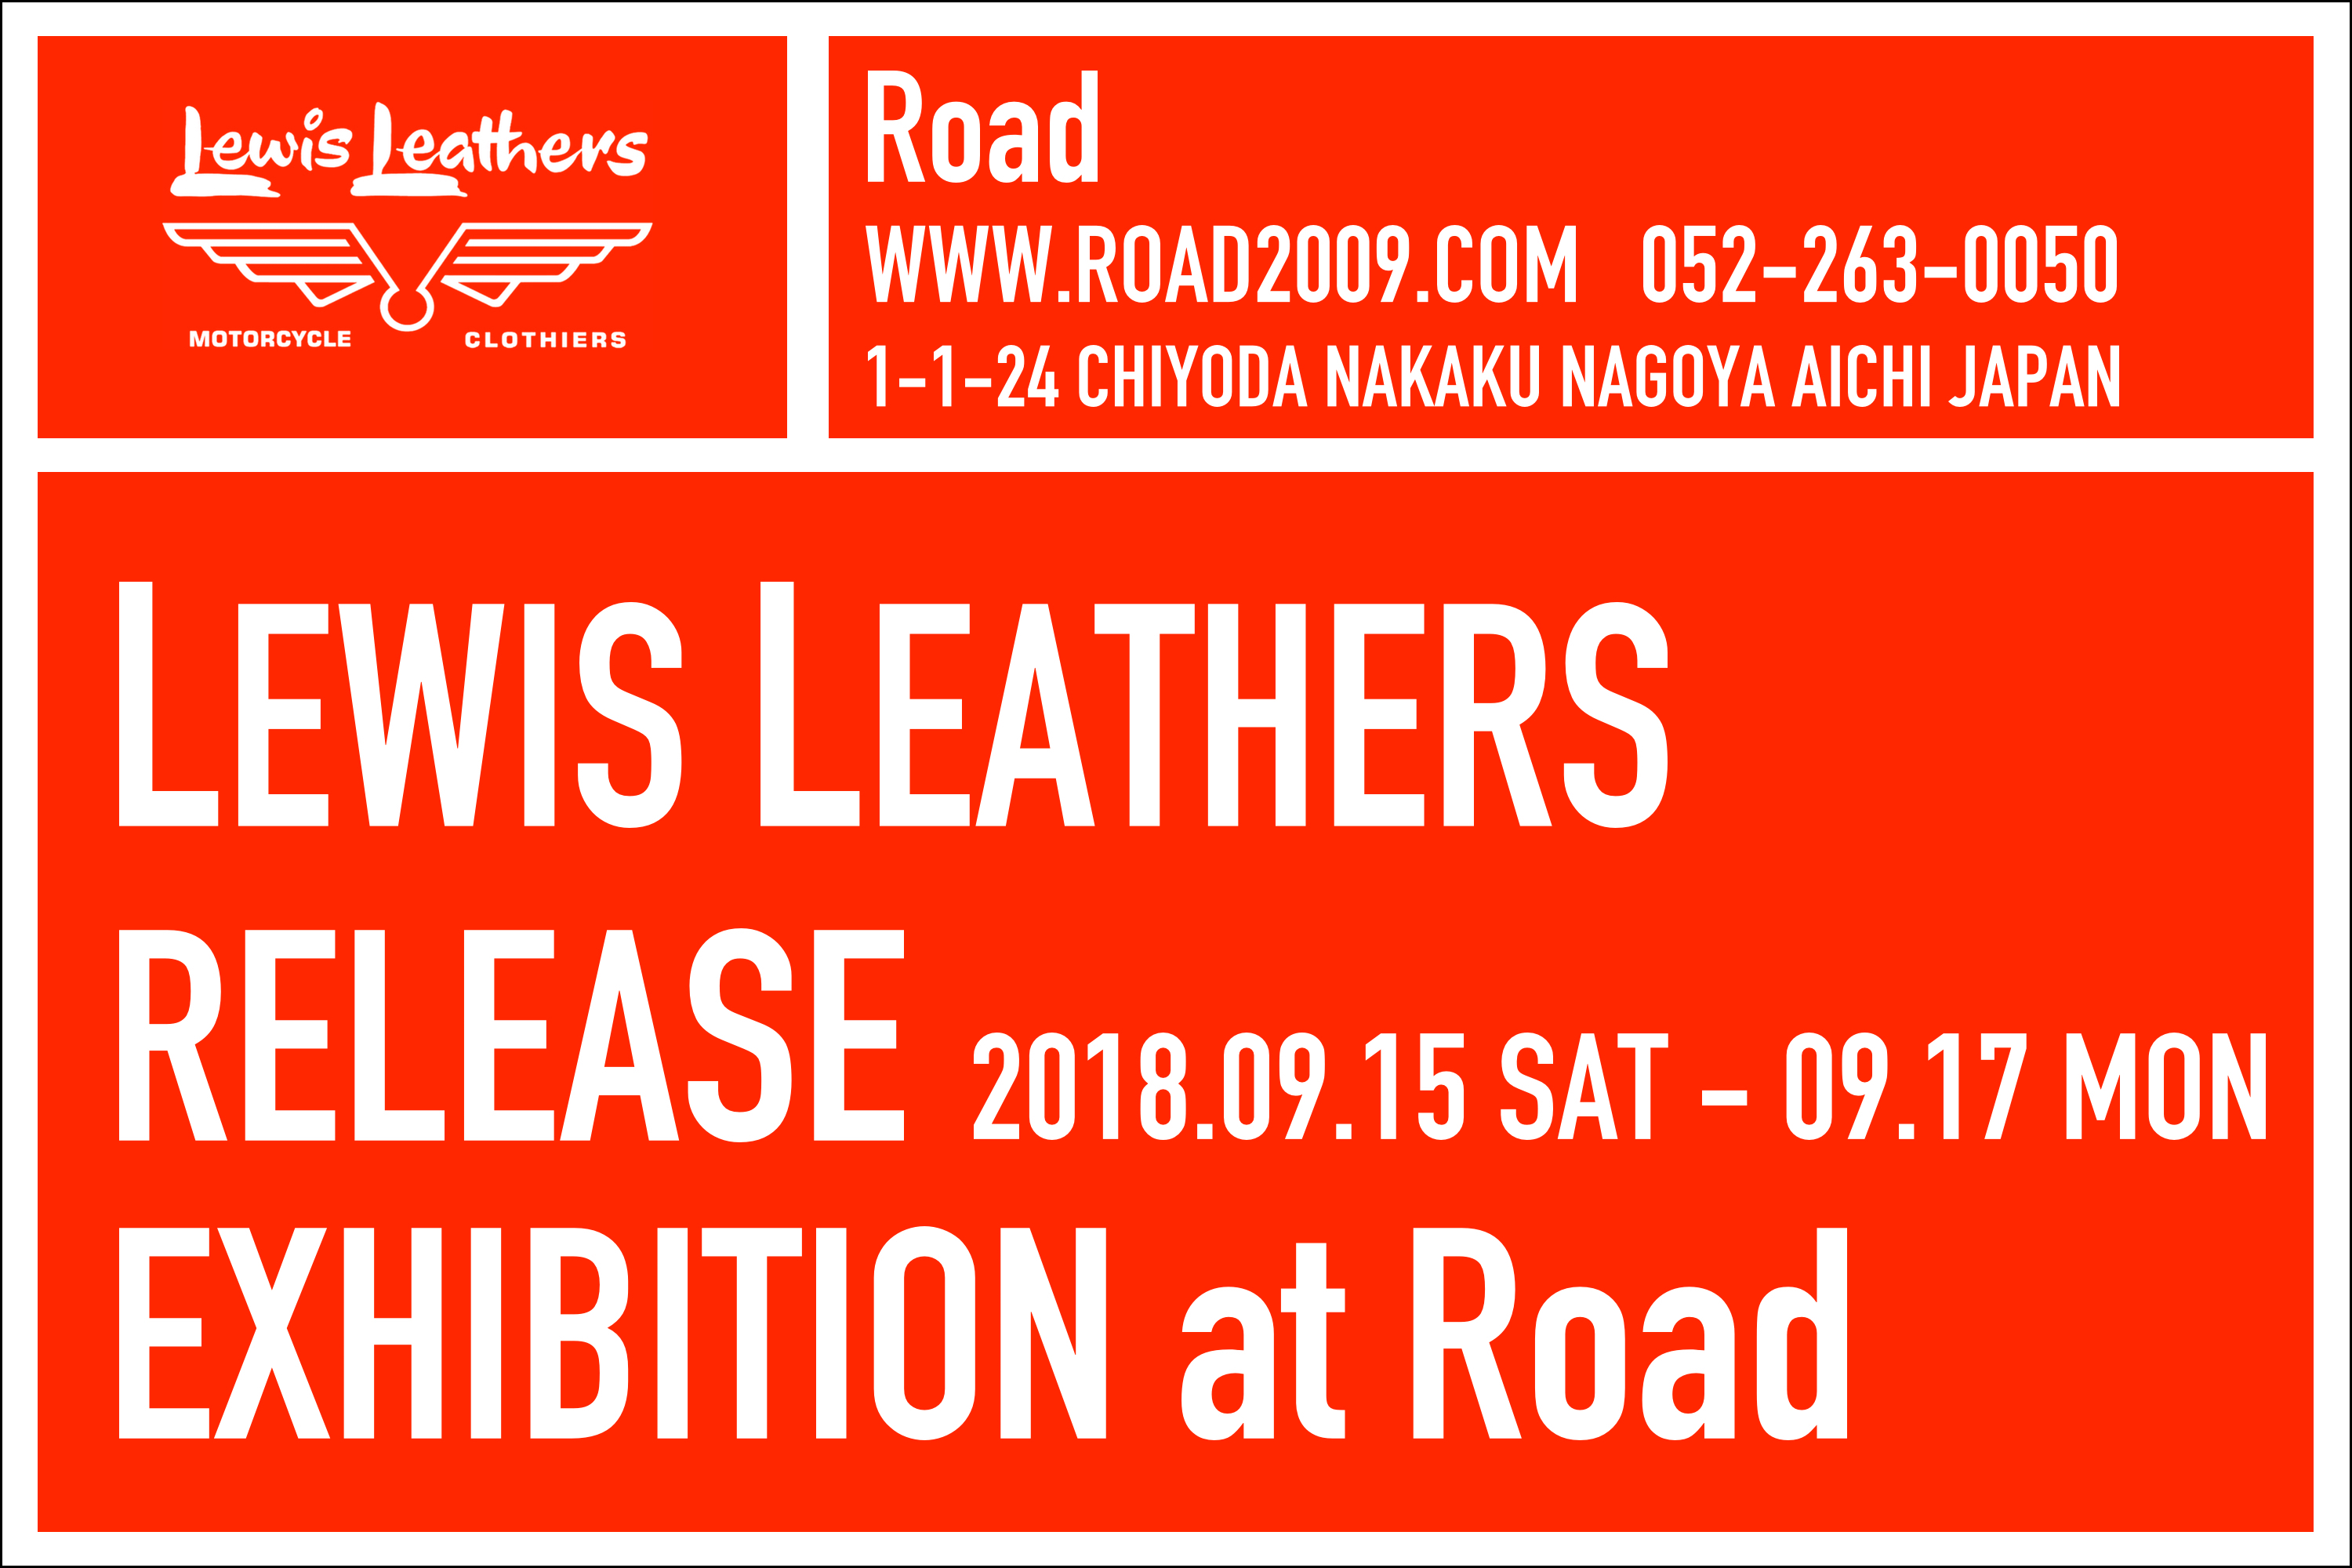 LEWIS LEATHERS RELEASE EXHIBITION